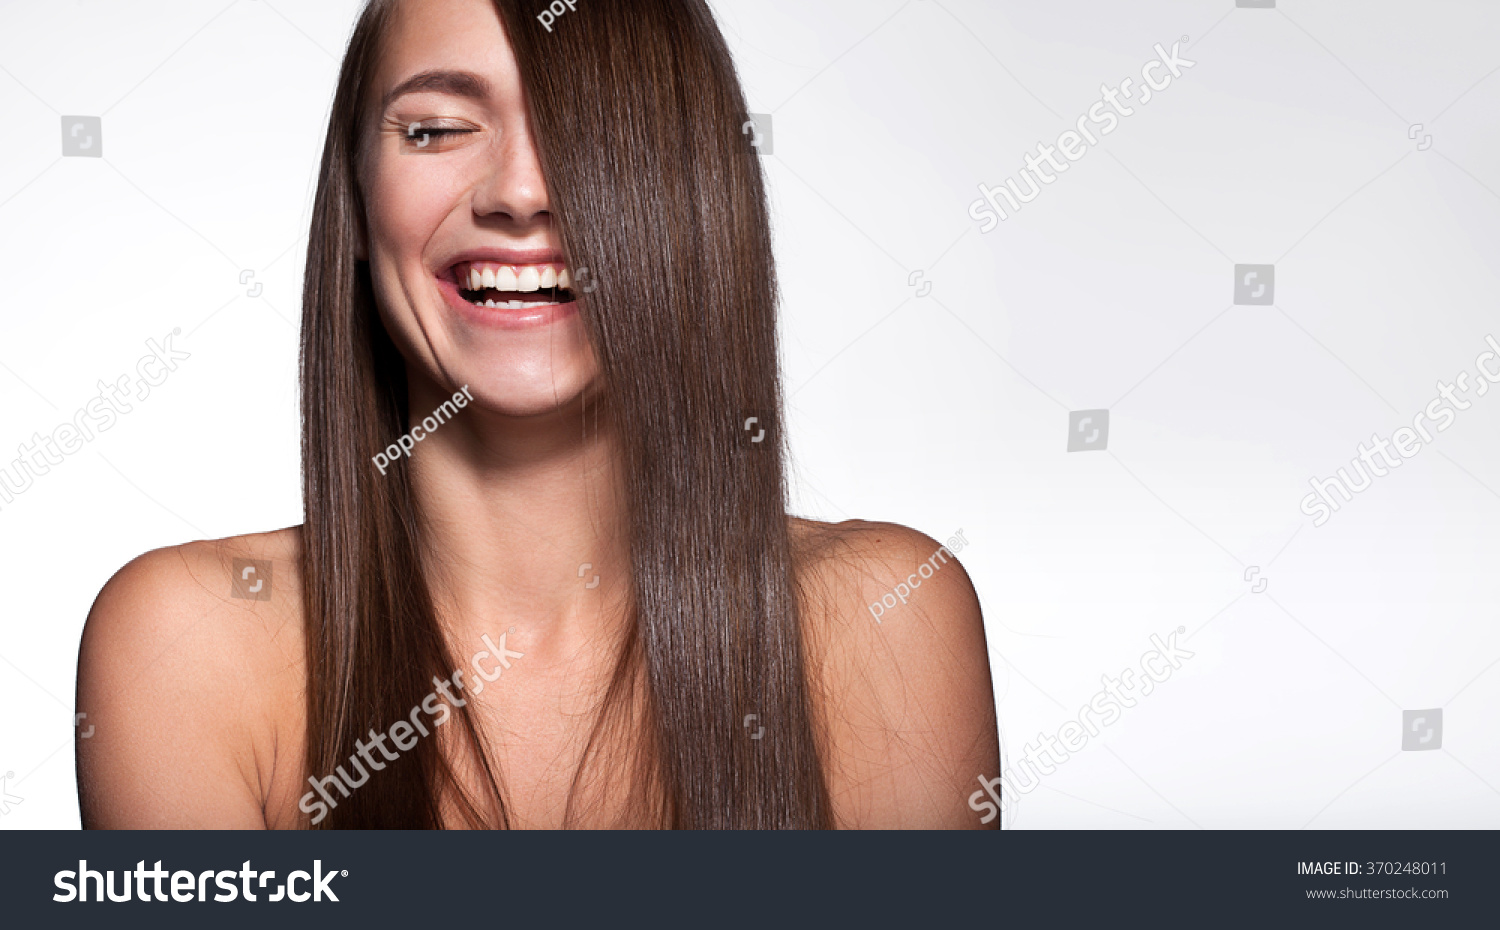 Laughing girl with shiny black hair and perfect clean skin on a white background #370248011